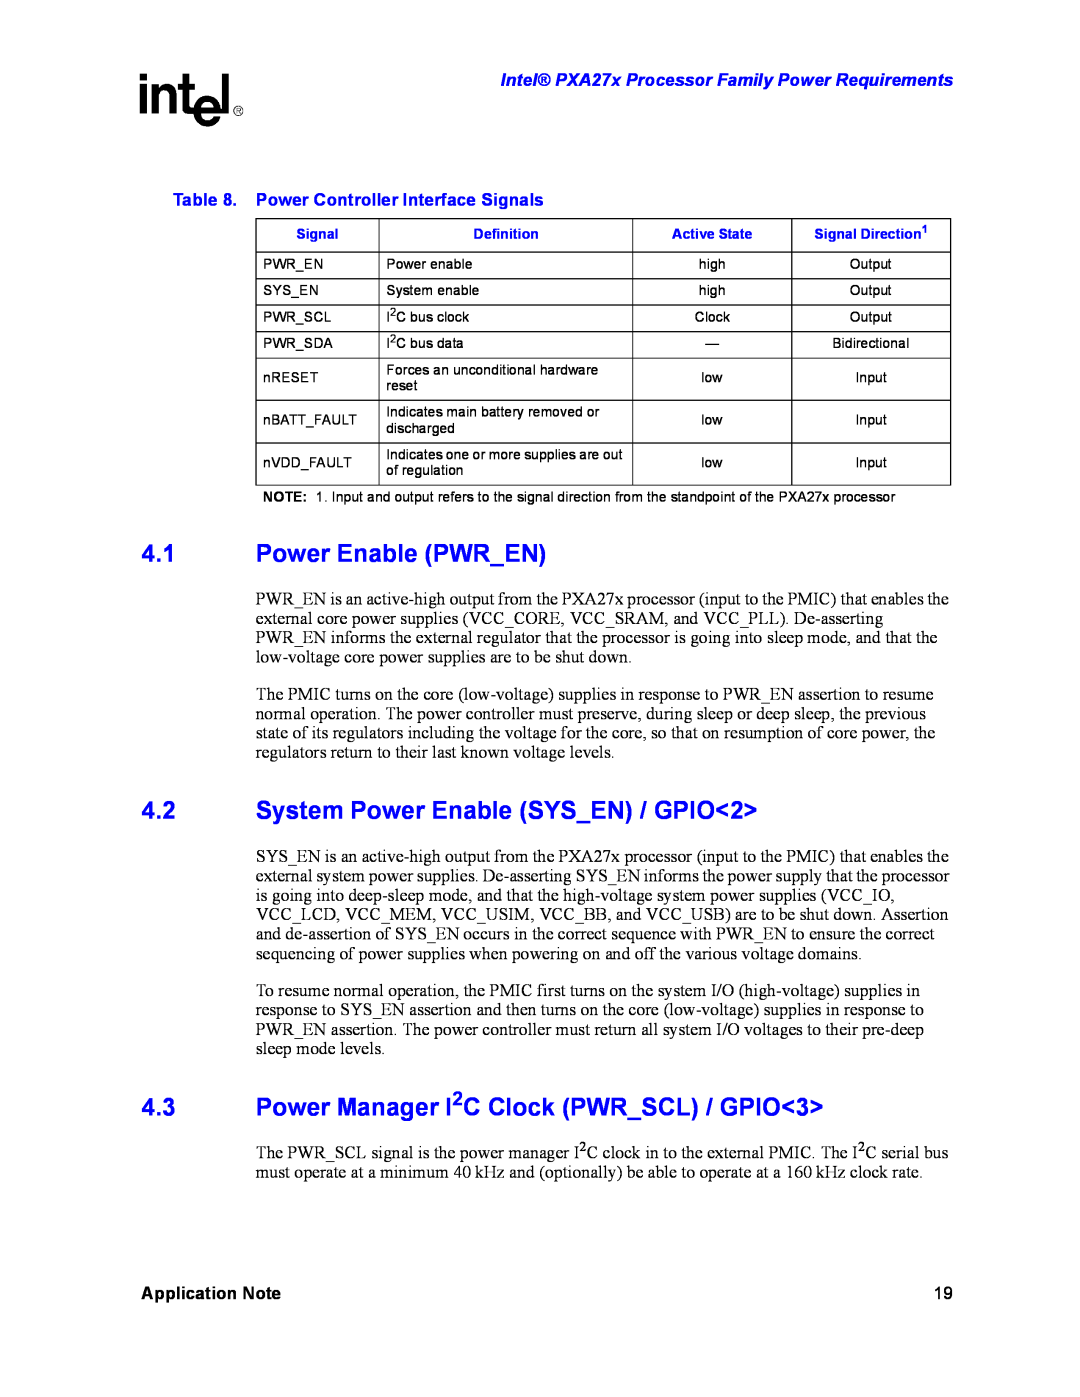 Intel PXA27X manual Power Enable PWREN, System Power Enable SYSEN / GPIO2, Power Manager I2C Clock PWRSCL / GPIO3 